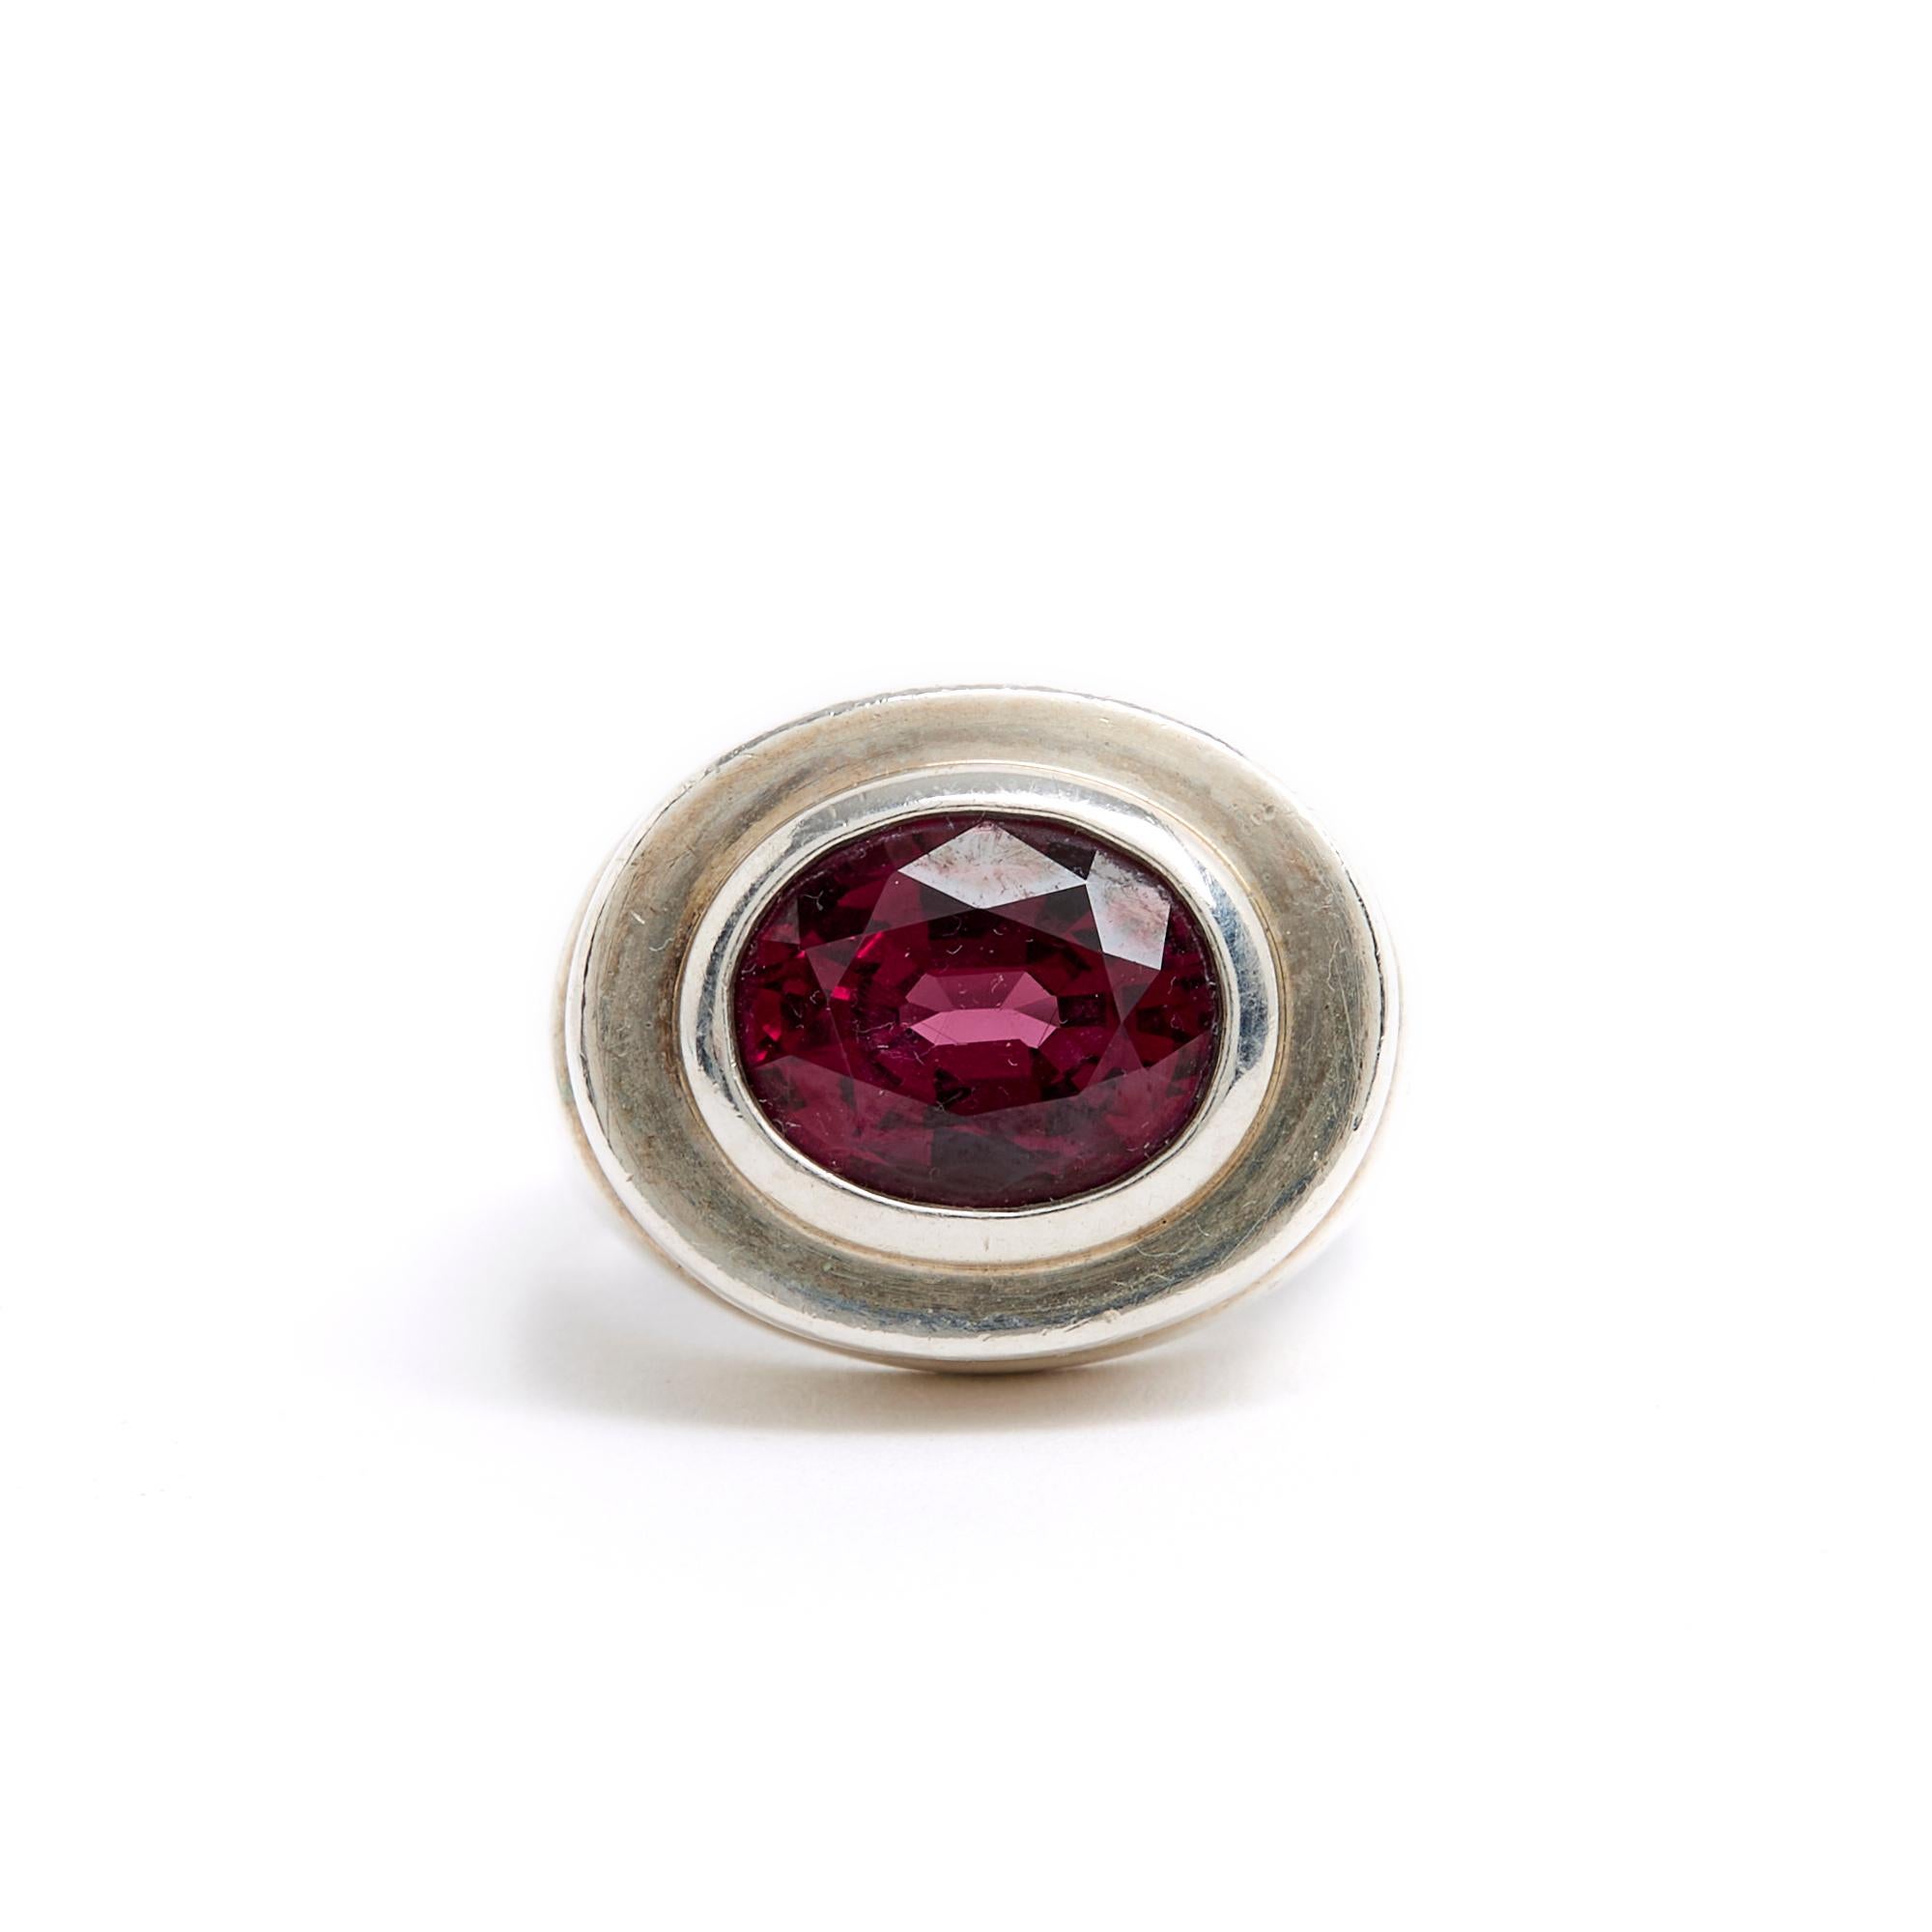 Tiffany&CO ring by Paloma Picasso in 925/1000 silver, Art Deco style, adorned with a beautiful rhodolite (garnet family) in shades of red rose. Finger size 51/52 or US5 3/4, internal diameter 1.65 cm. The ring has been worn and it shows traces and